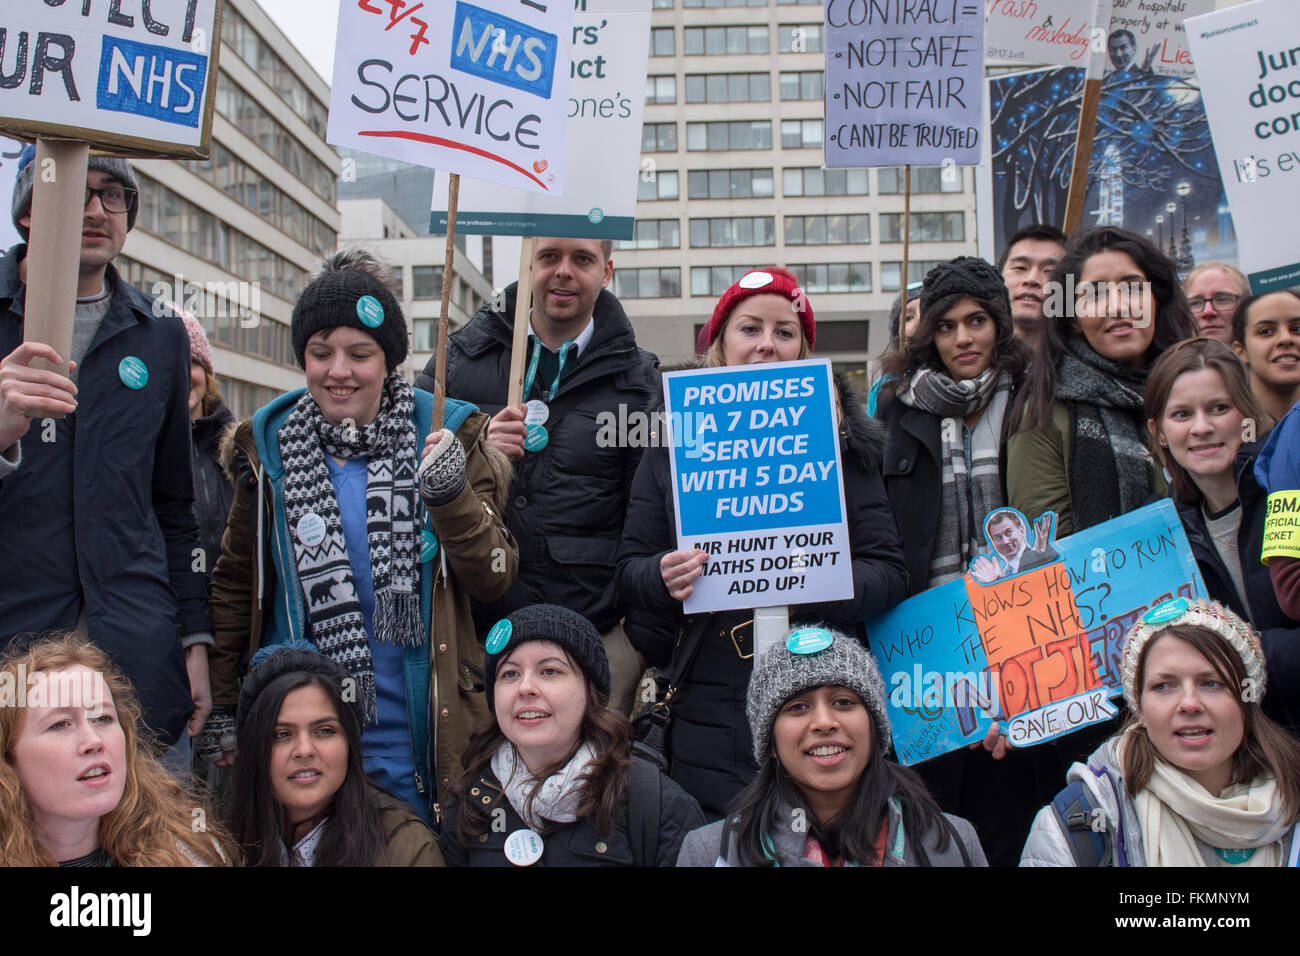 London 9th March 2016, NHS Junior Doctors picket, St Thomas Hospital, Junior doctor pickets Credit:  Ian Davidson/Alamy Live News Stock Photo